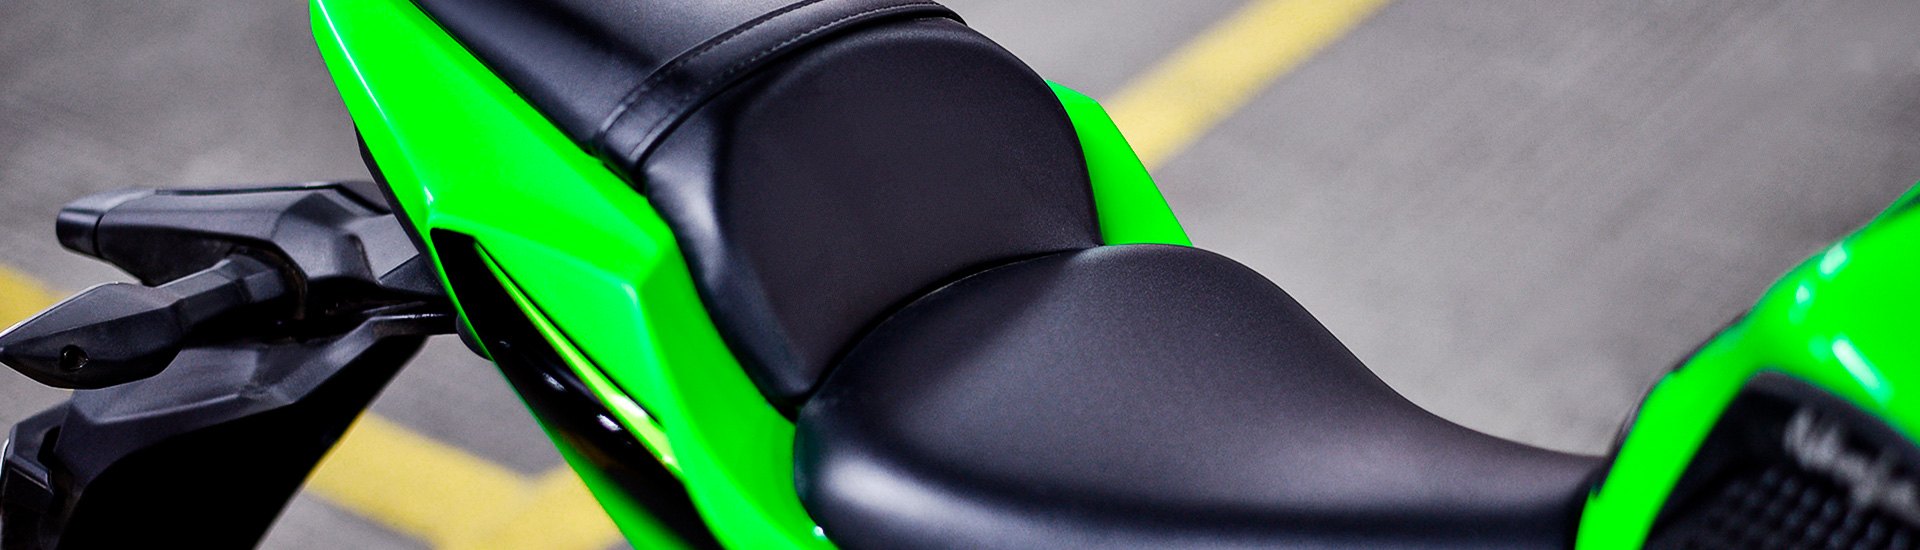 Universal Motorcycle Seats & Seat Covers